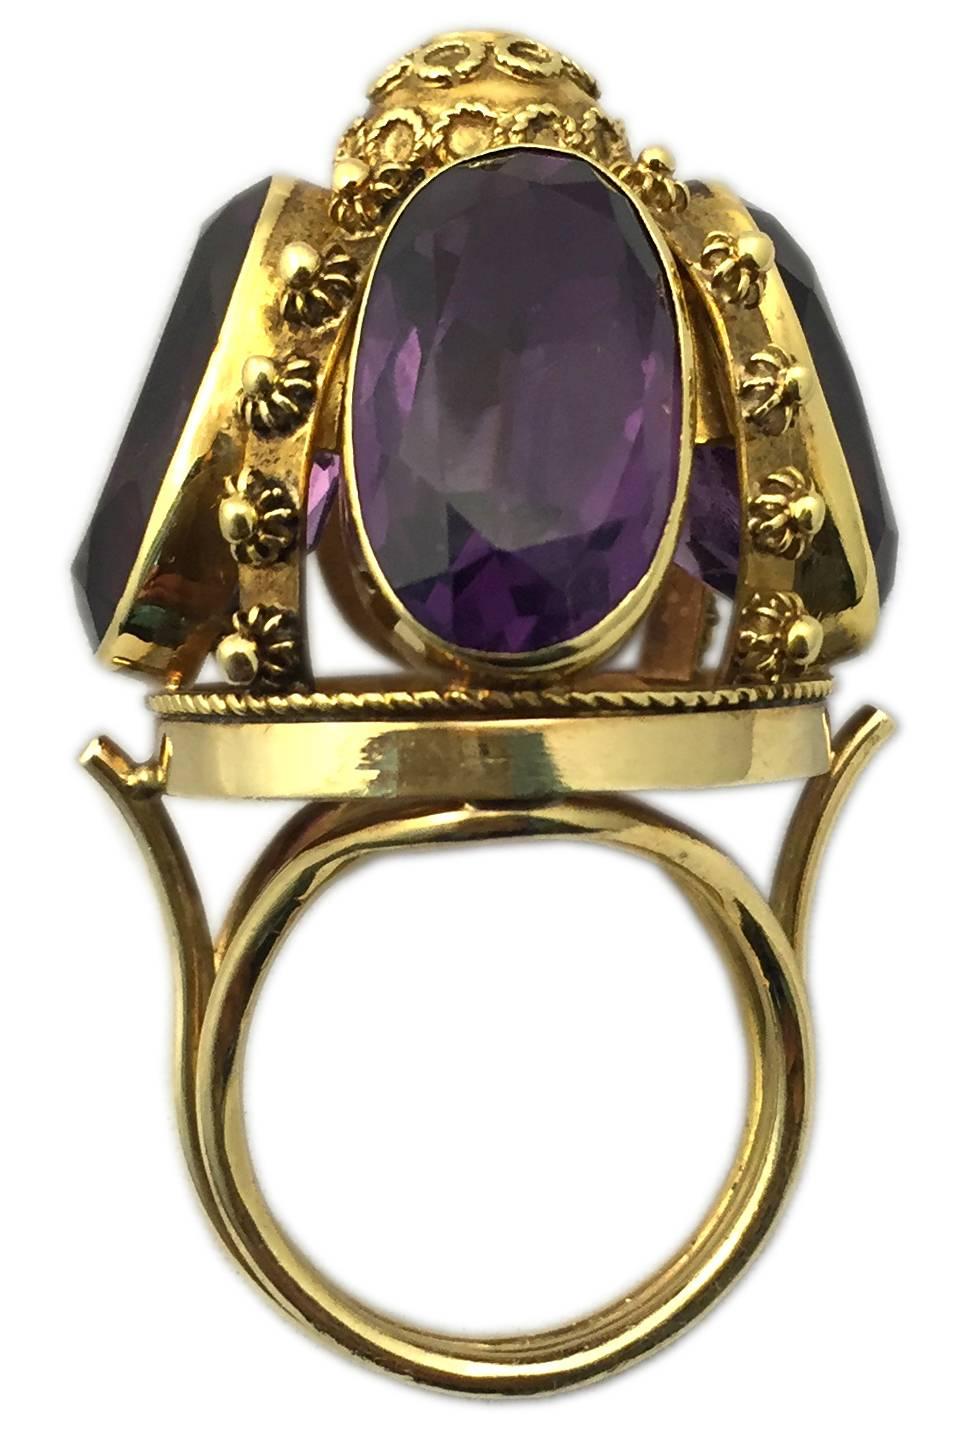 An antique dome shaped 18kt yellow gold ring, showcasing four oval cut amethysts on its side, embellished by a brilliant cut diamond on its top, presenting fine filigree gold decorations. Circa 1880